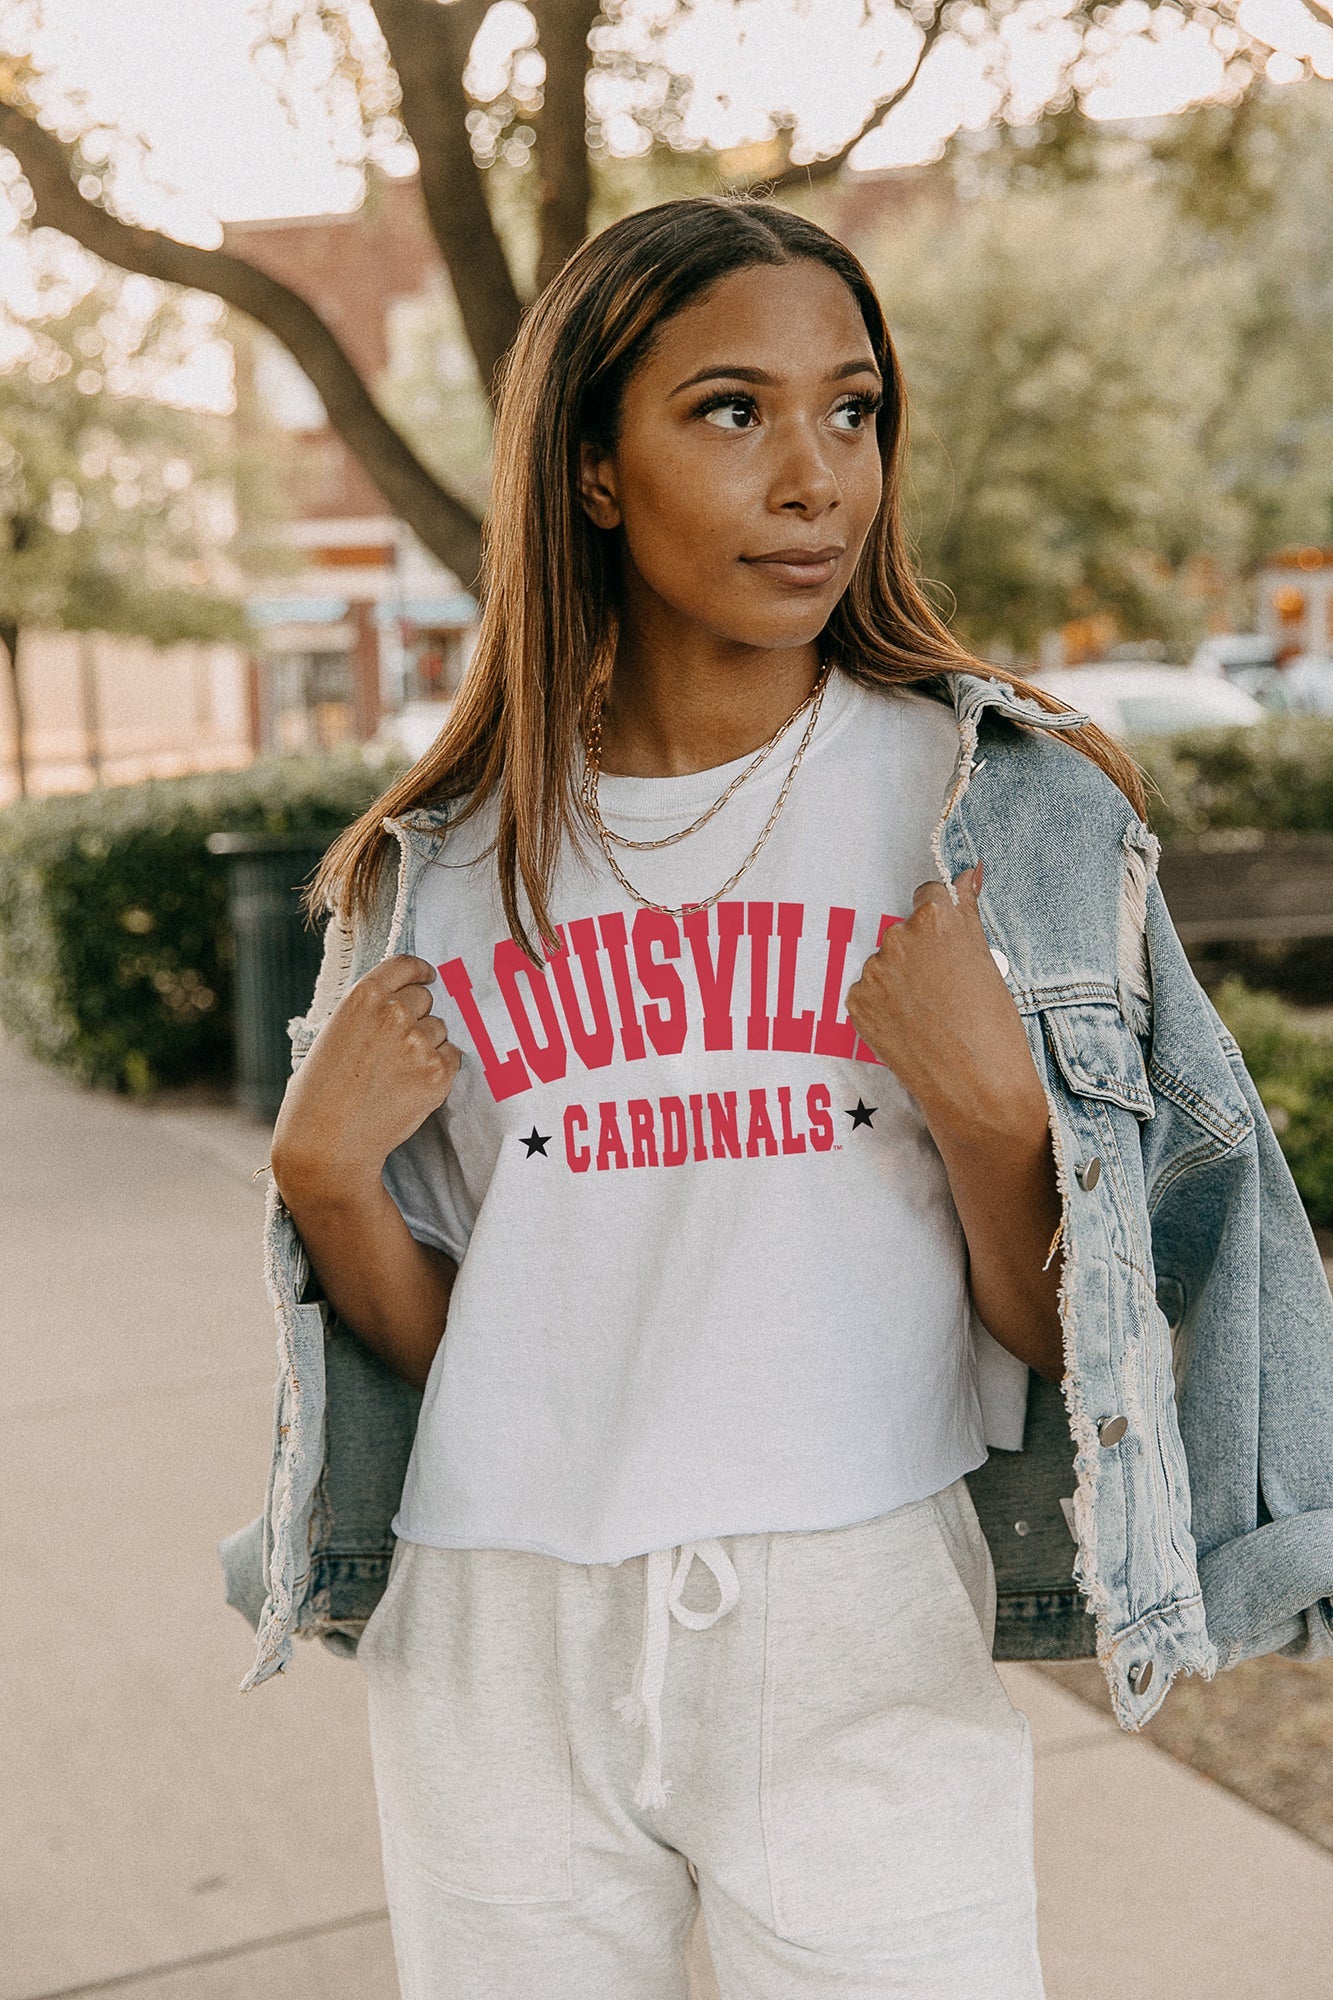 LOUISVILLE CARDINALS RUNNING BACK BOX SHOULDER BOYFRIEND TEE BY MADI P –  GAMEDAY COUTURE